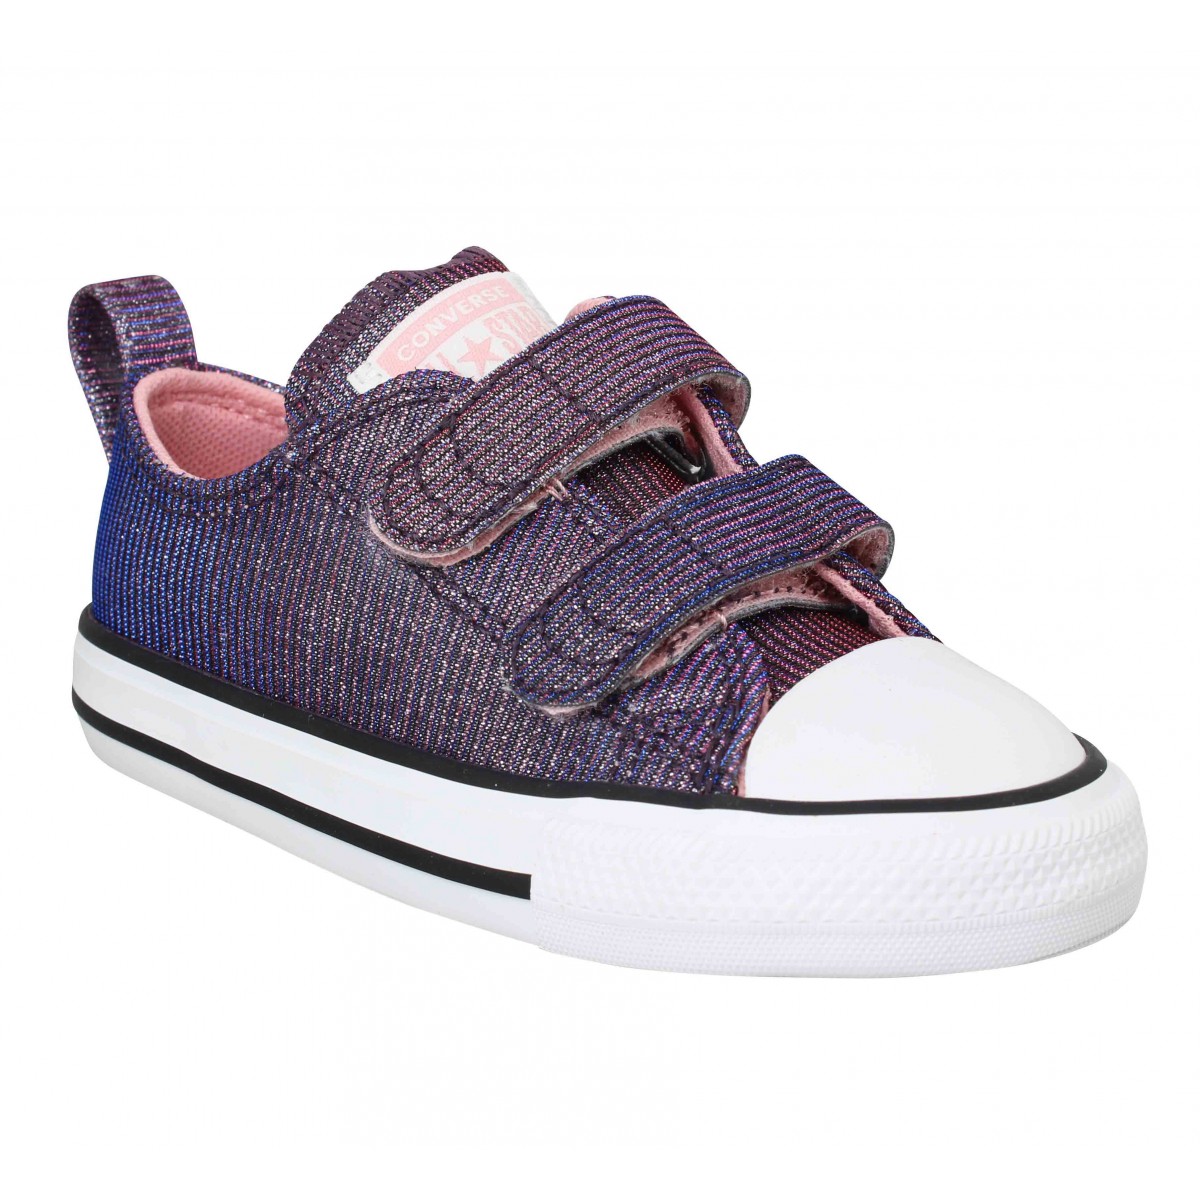 Baskets CONVERSE Chuck Taylor All Star 2V toile Enfant Space Star